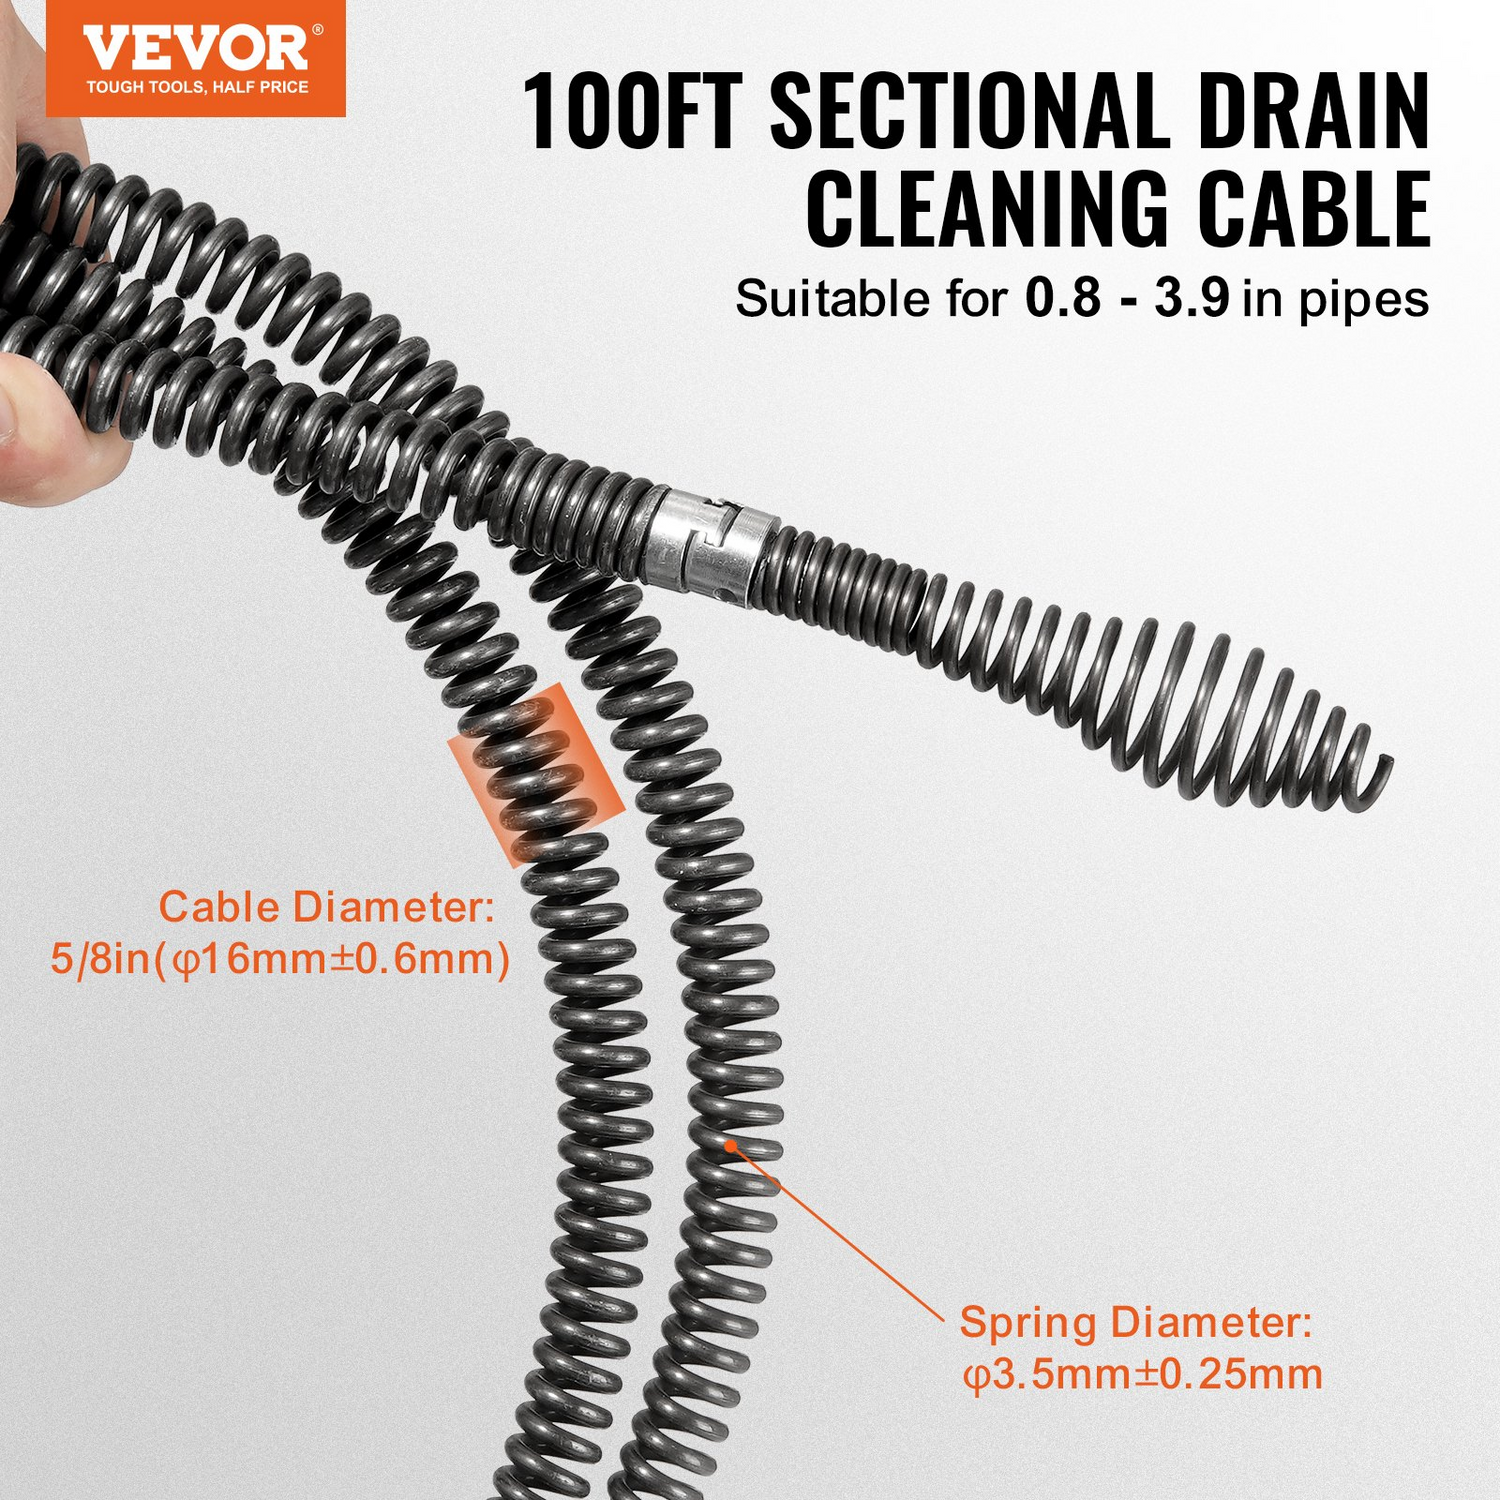 VEVOR Drain Cleaning Cable 100 FT x 5/8 Inch, Professional Sectional Drain Cleaner Cable with 7 Cutters for 0.8" to 3.9" Pipes, Hollow Core Sewer Drain Auger Cable for Sink, Floor Drain, Toilet, Goodies N Stuff